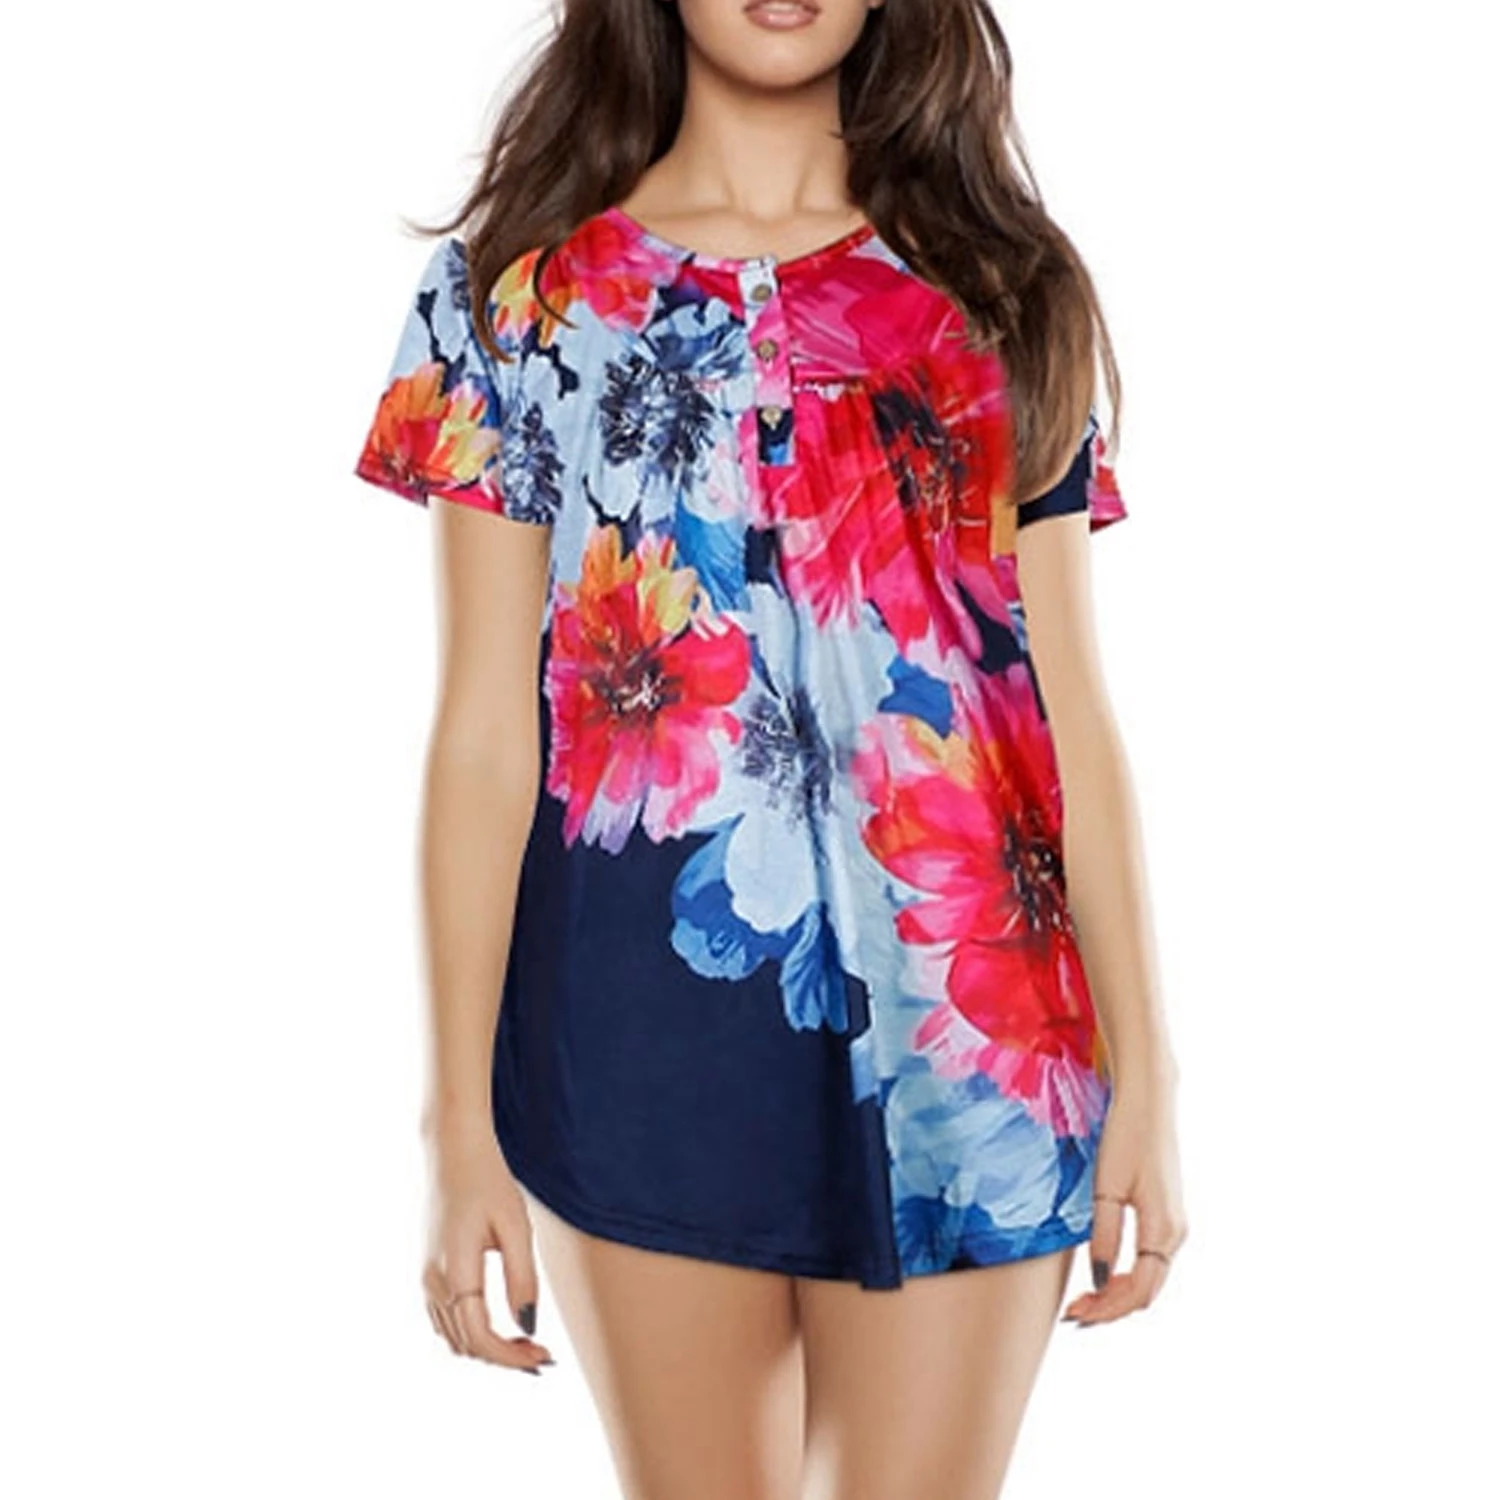 Women's Summer Shirts Tops Loose Short Sleeve T-Shirts Casual Floral Printed Button Shirts Blouse